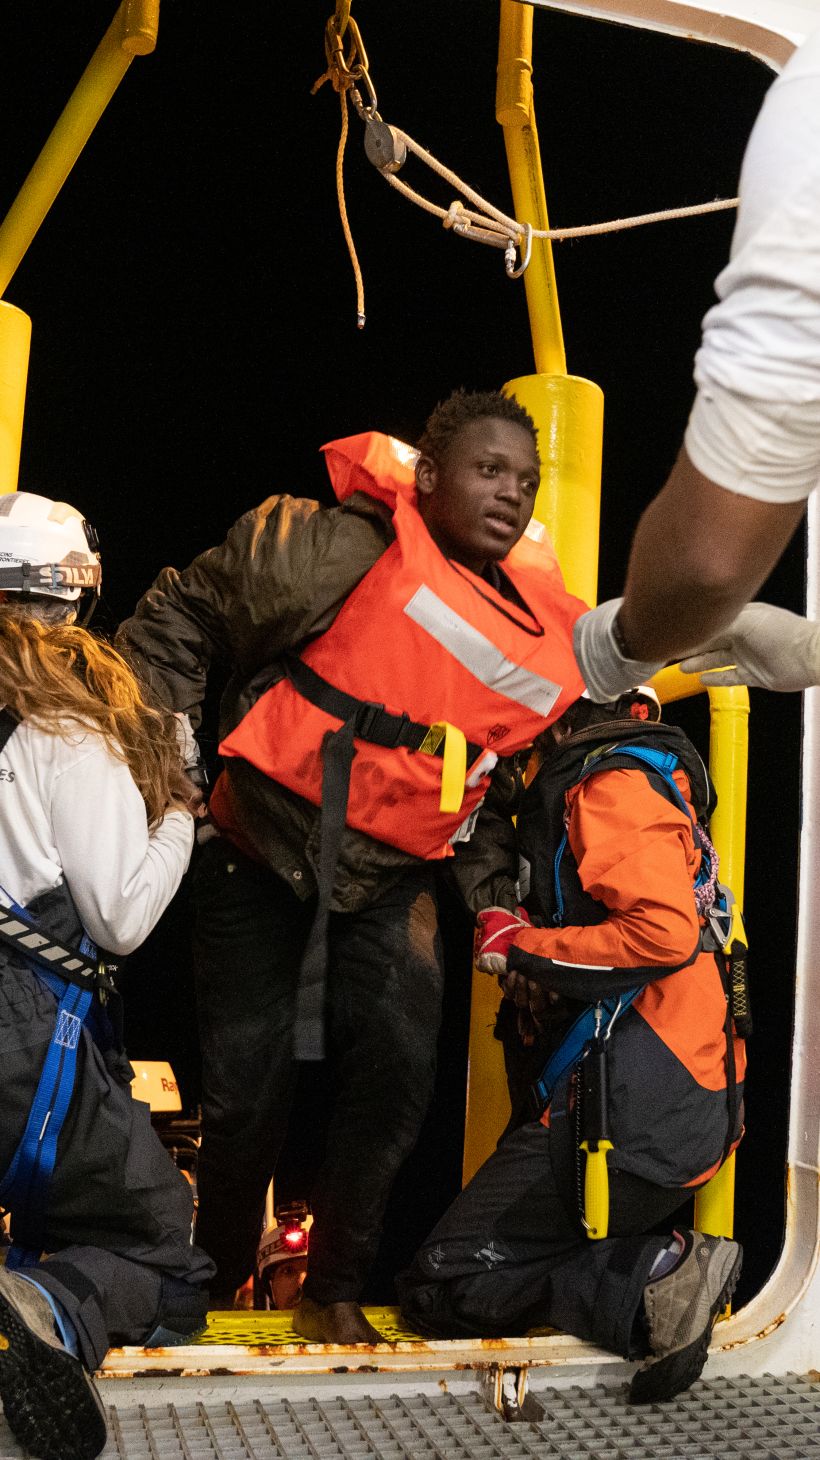 A survivor from a critical night rescue in the Med sea